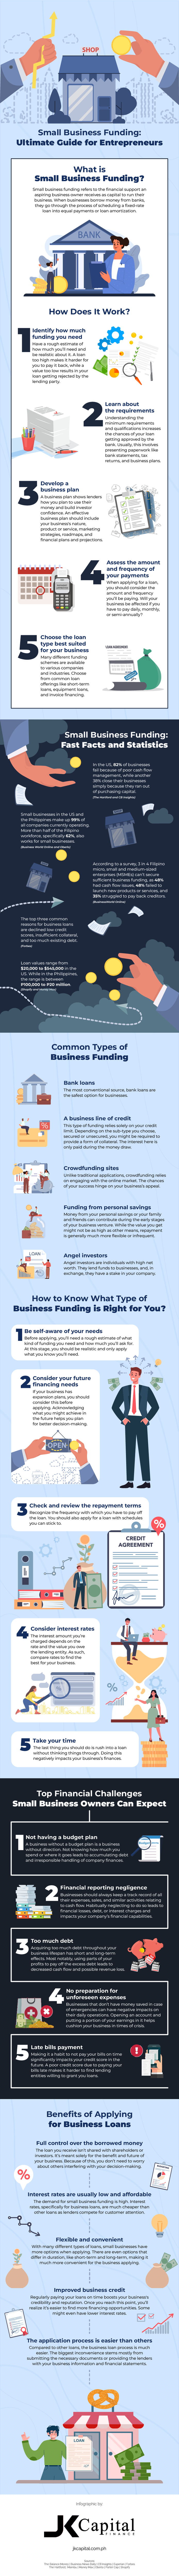 Small Business Funding, Ultimate Guide for Entrepreneurs, Infographic